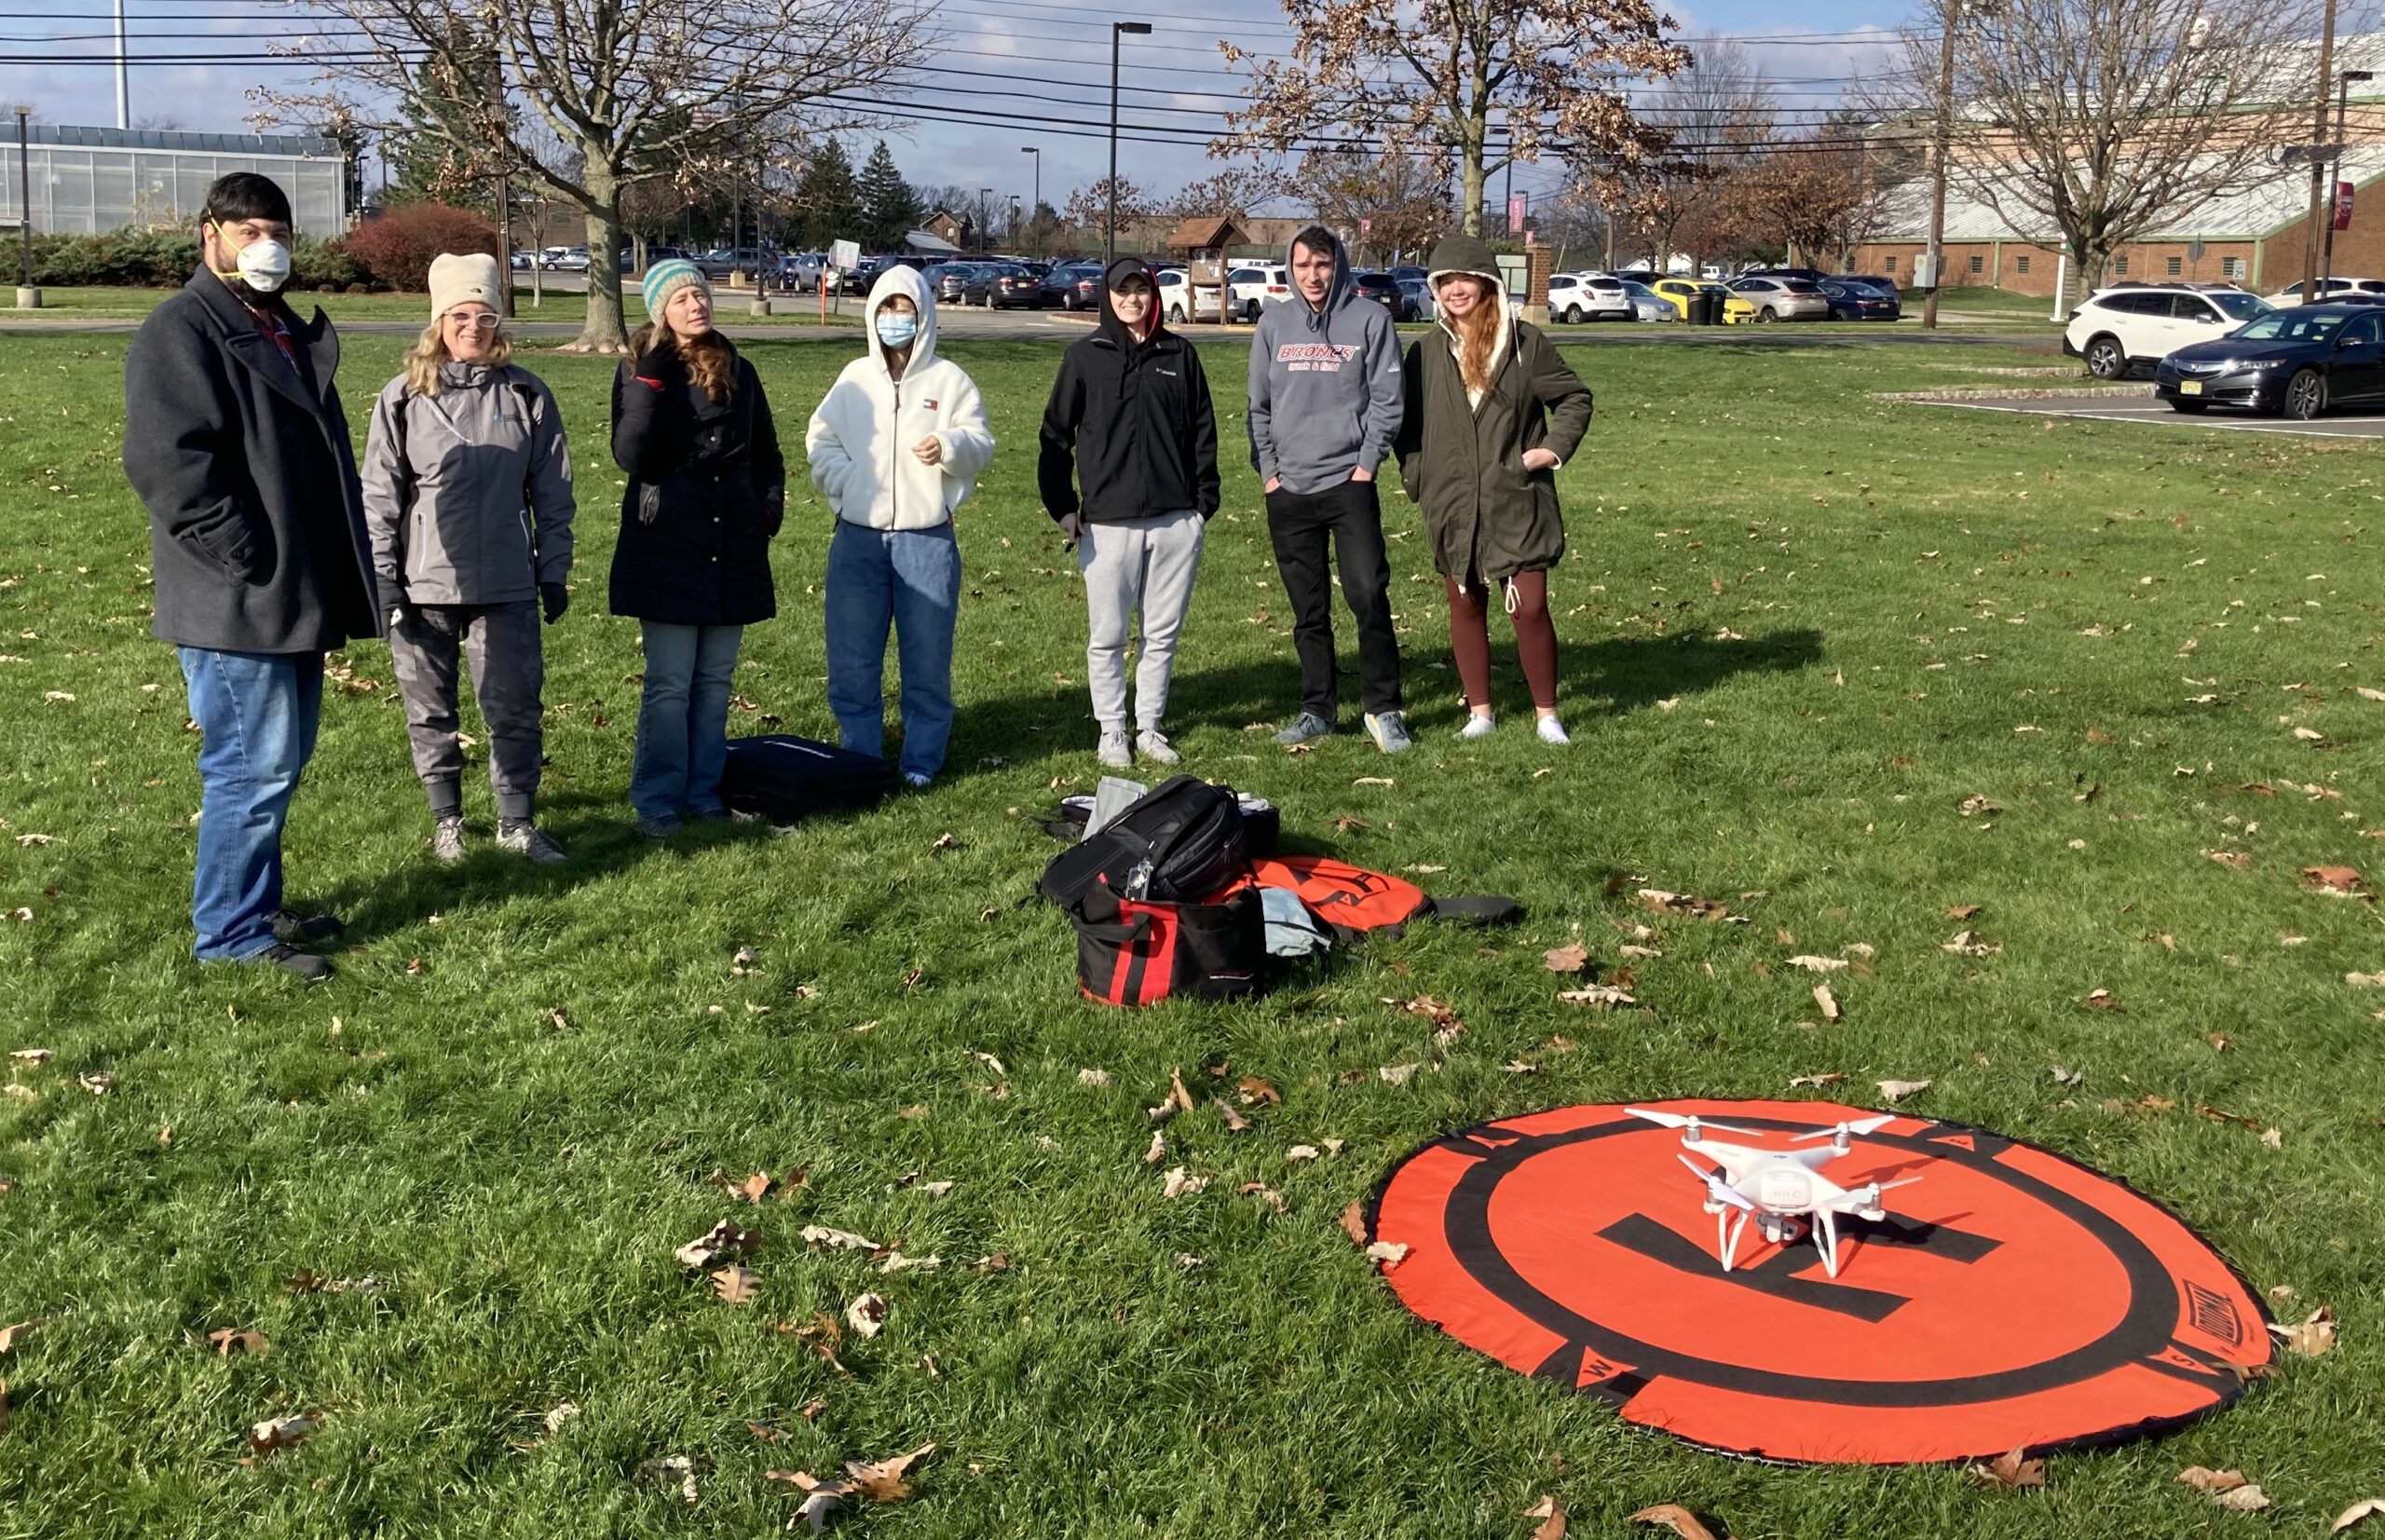 Masters of Operational Oceanography students explore the use of drones for remote sensing